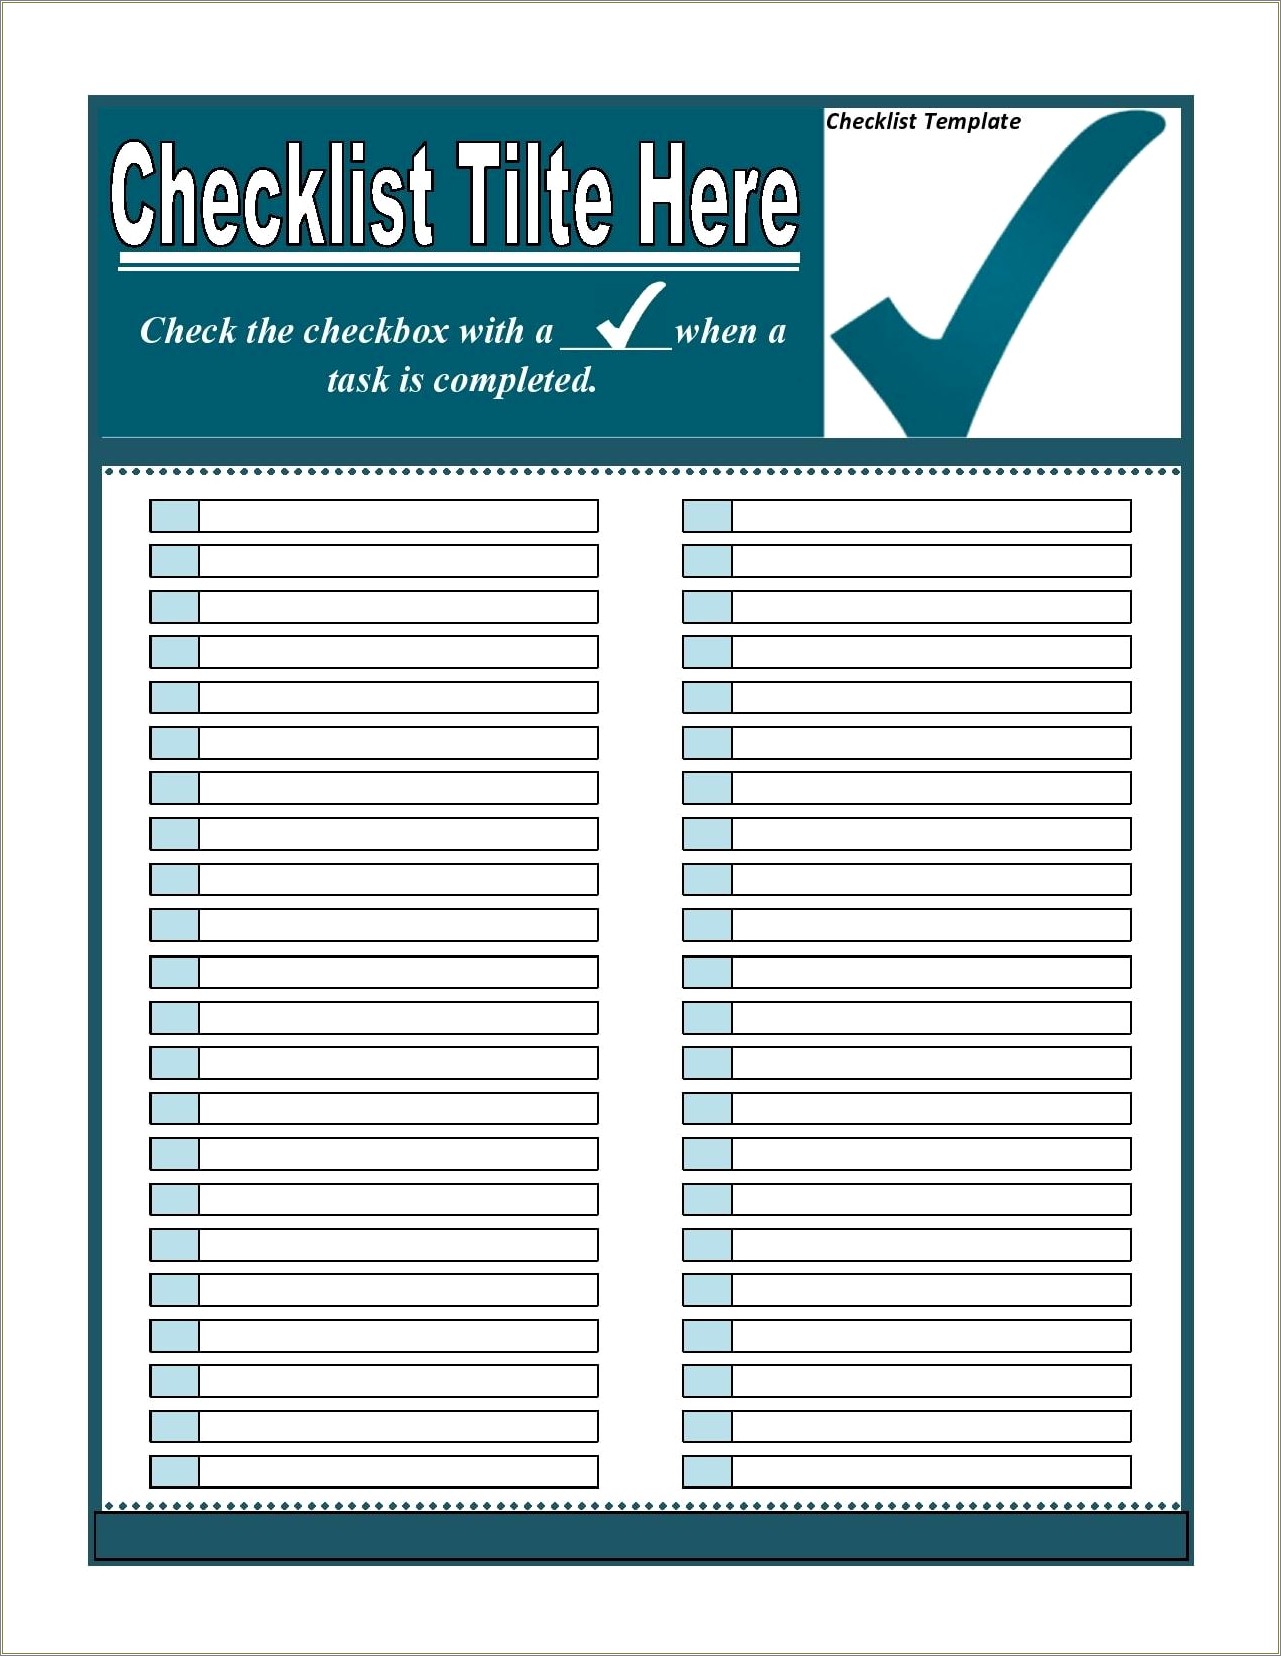 Illustrator Templates Free Checklists Forms For Microsoft Office